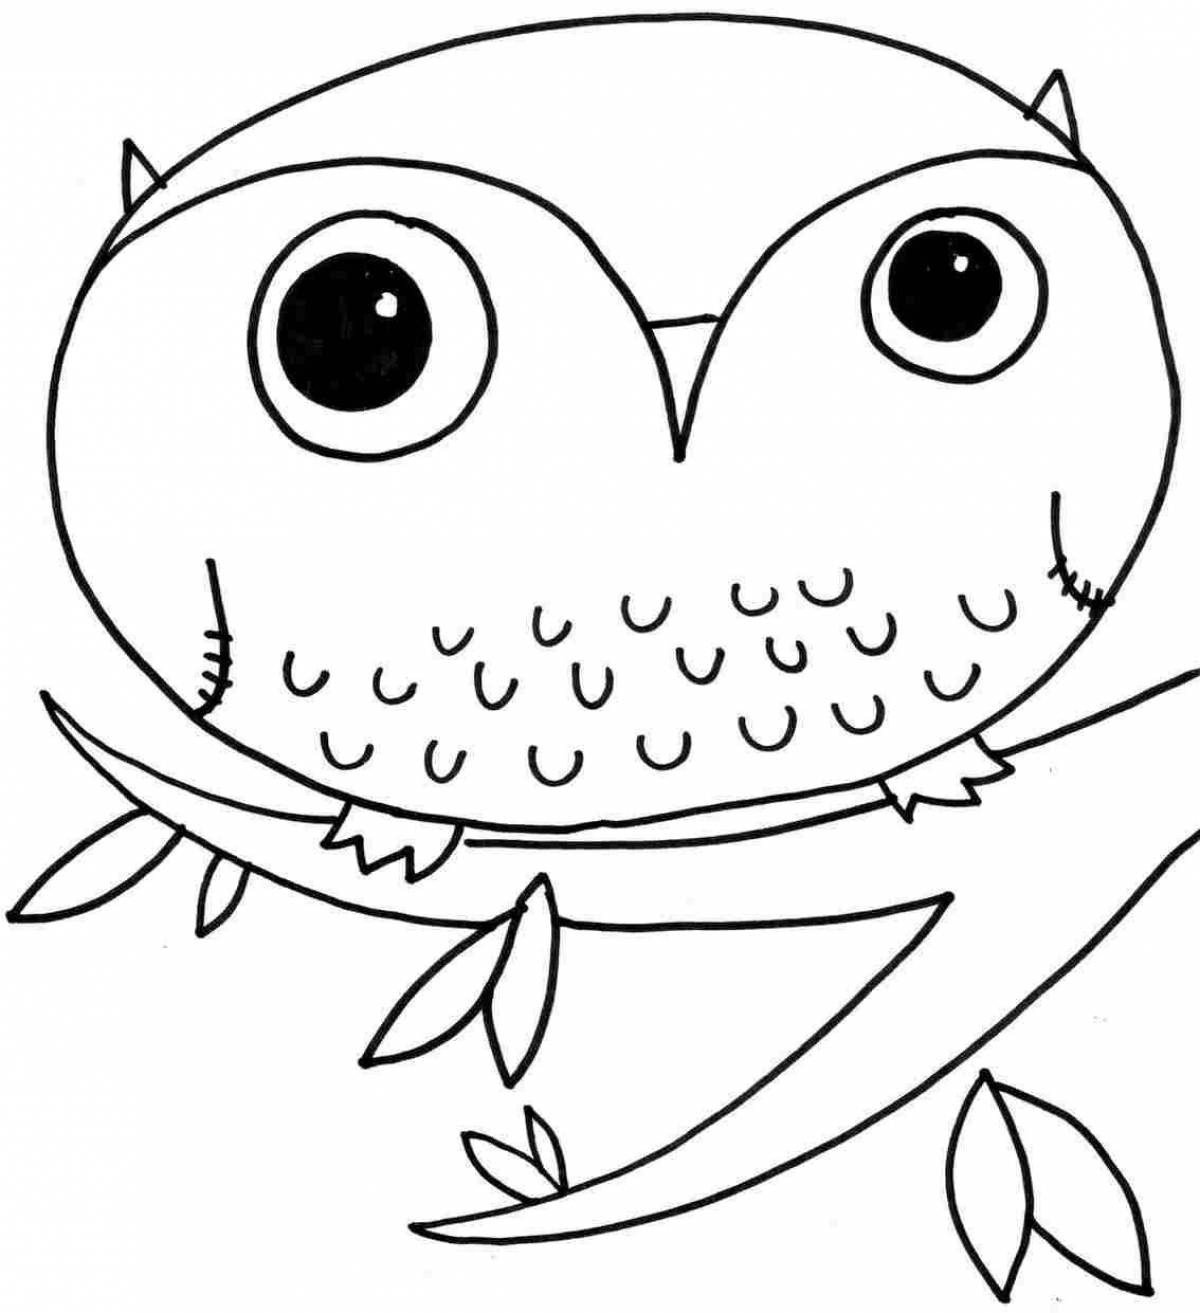 Bright owlet coloring page